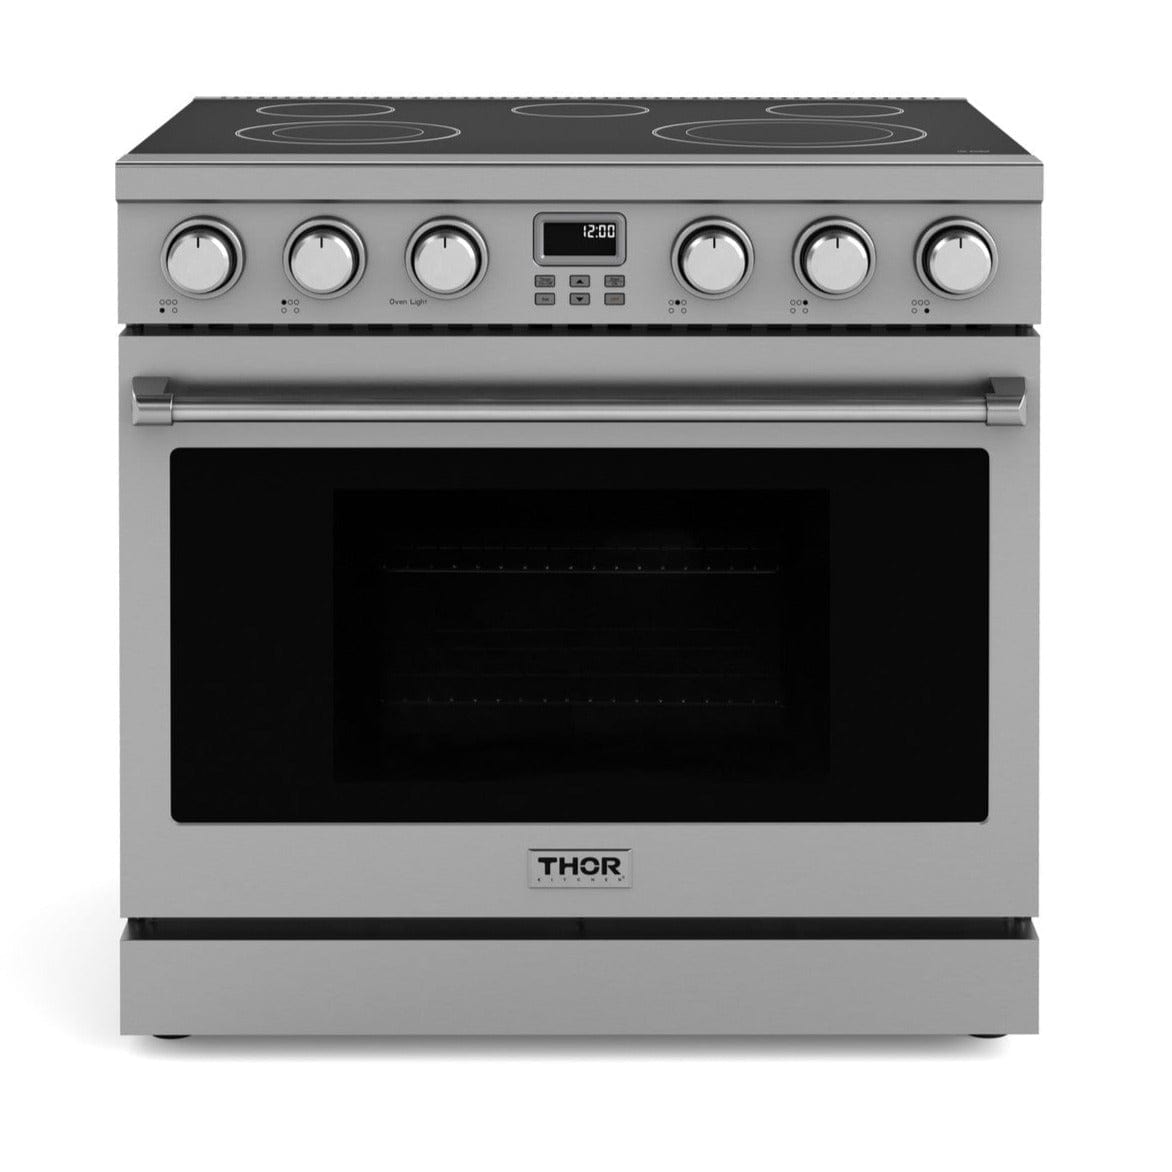 Thor Kitchen 36" Contemporary Professional Electric Range ARE36 Ranges ARE36 Luxury Appliances Direct